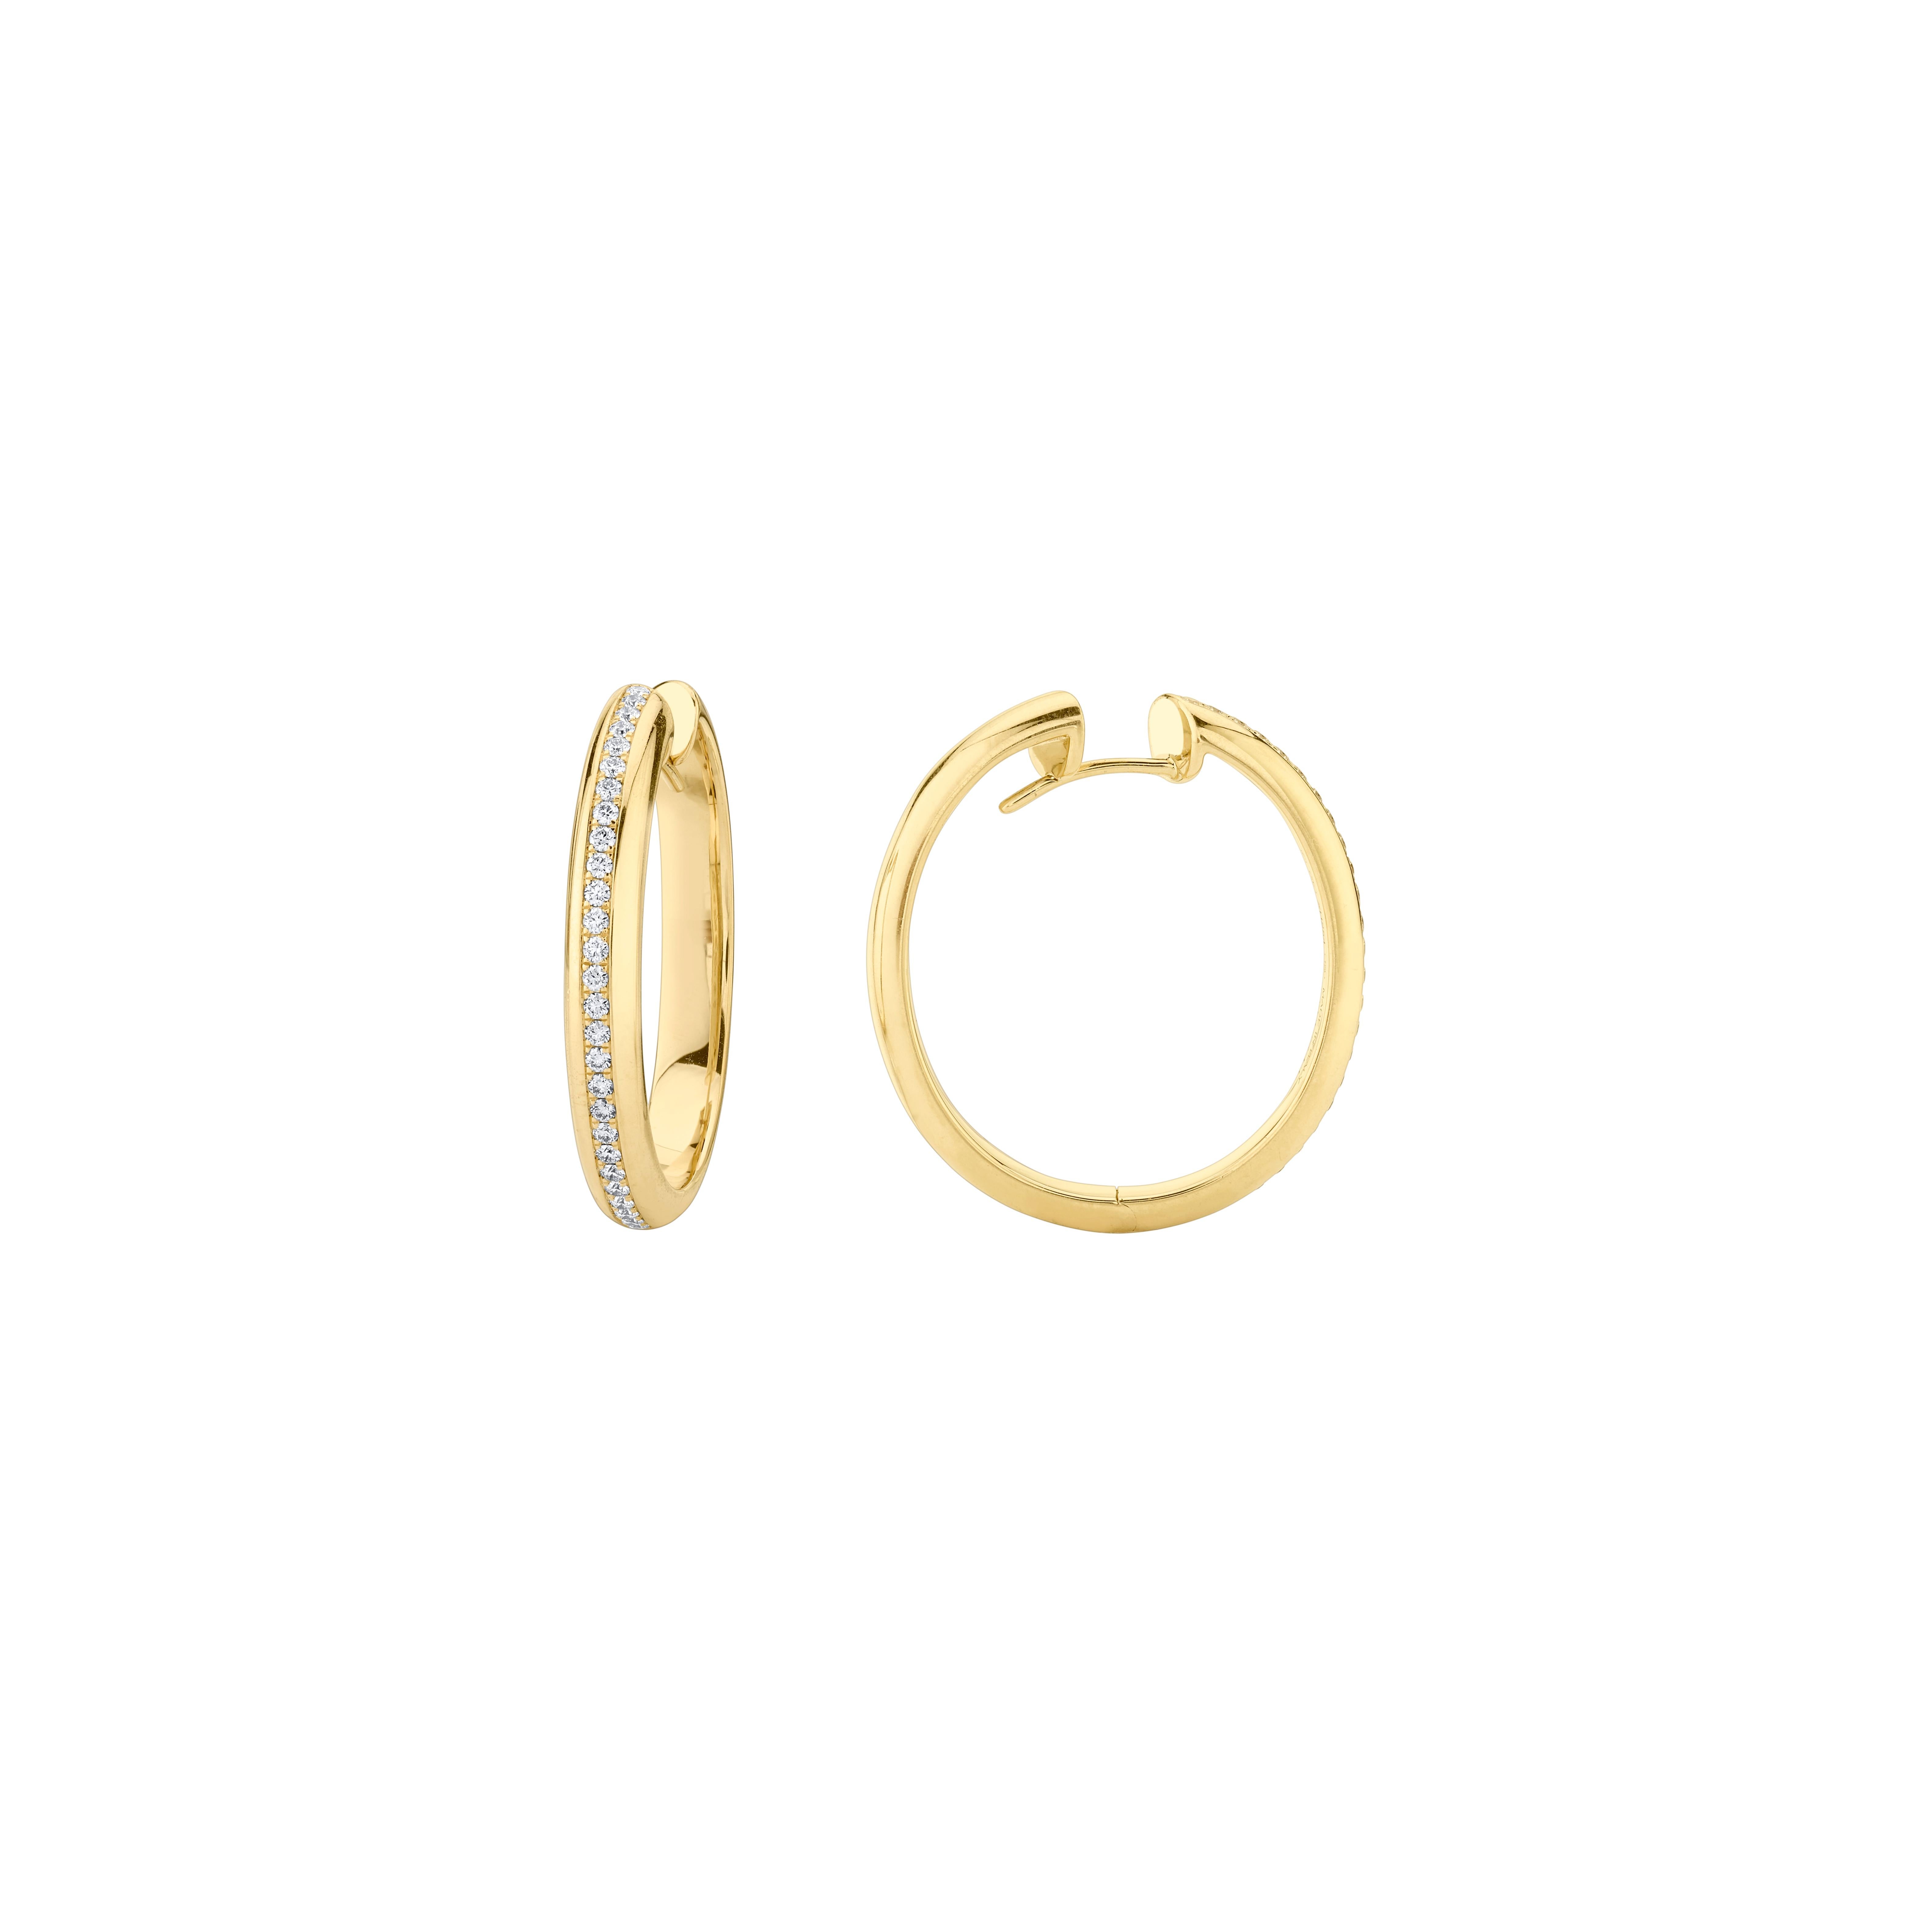 Style #: XH254P.
SYLVIA KONTENTE  18K Yellow gold diamond hoop earrings with polished finish.
Precision-cut, round brilliant diamonds.
Diamond total weight: 0.51ct tw.
Diamond color/clarity: DEF/VVS VS.
Polished finish.
High-end construction.
Size: